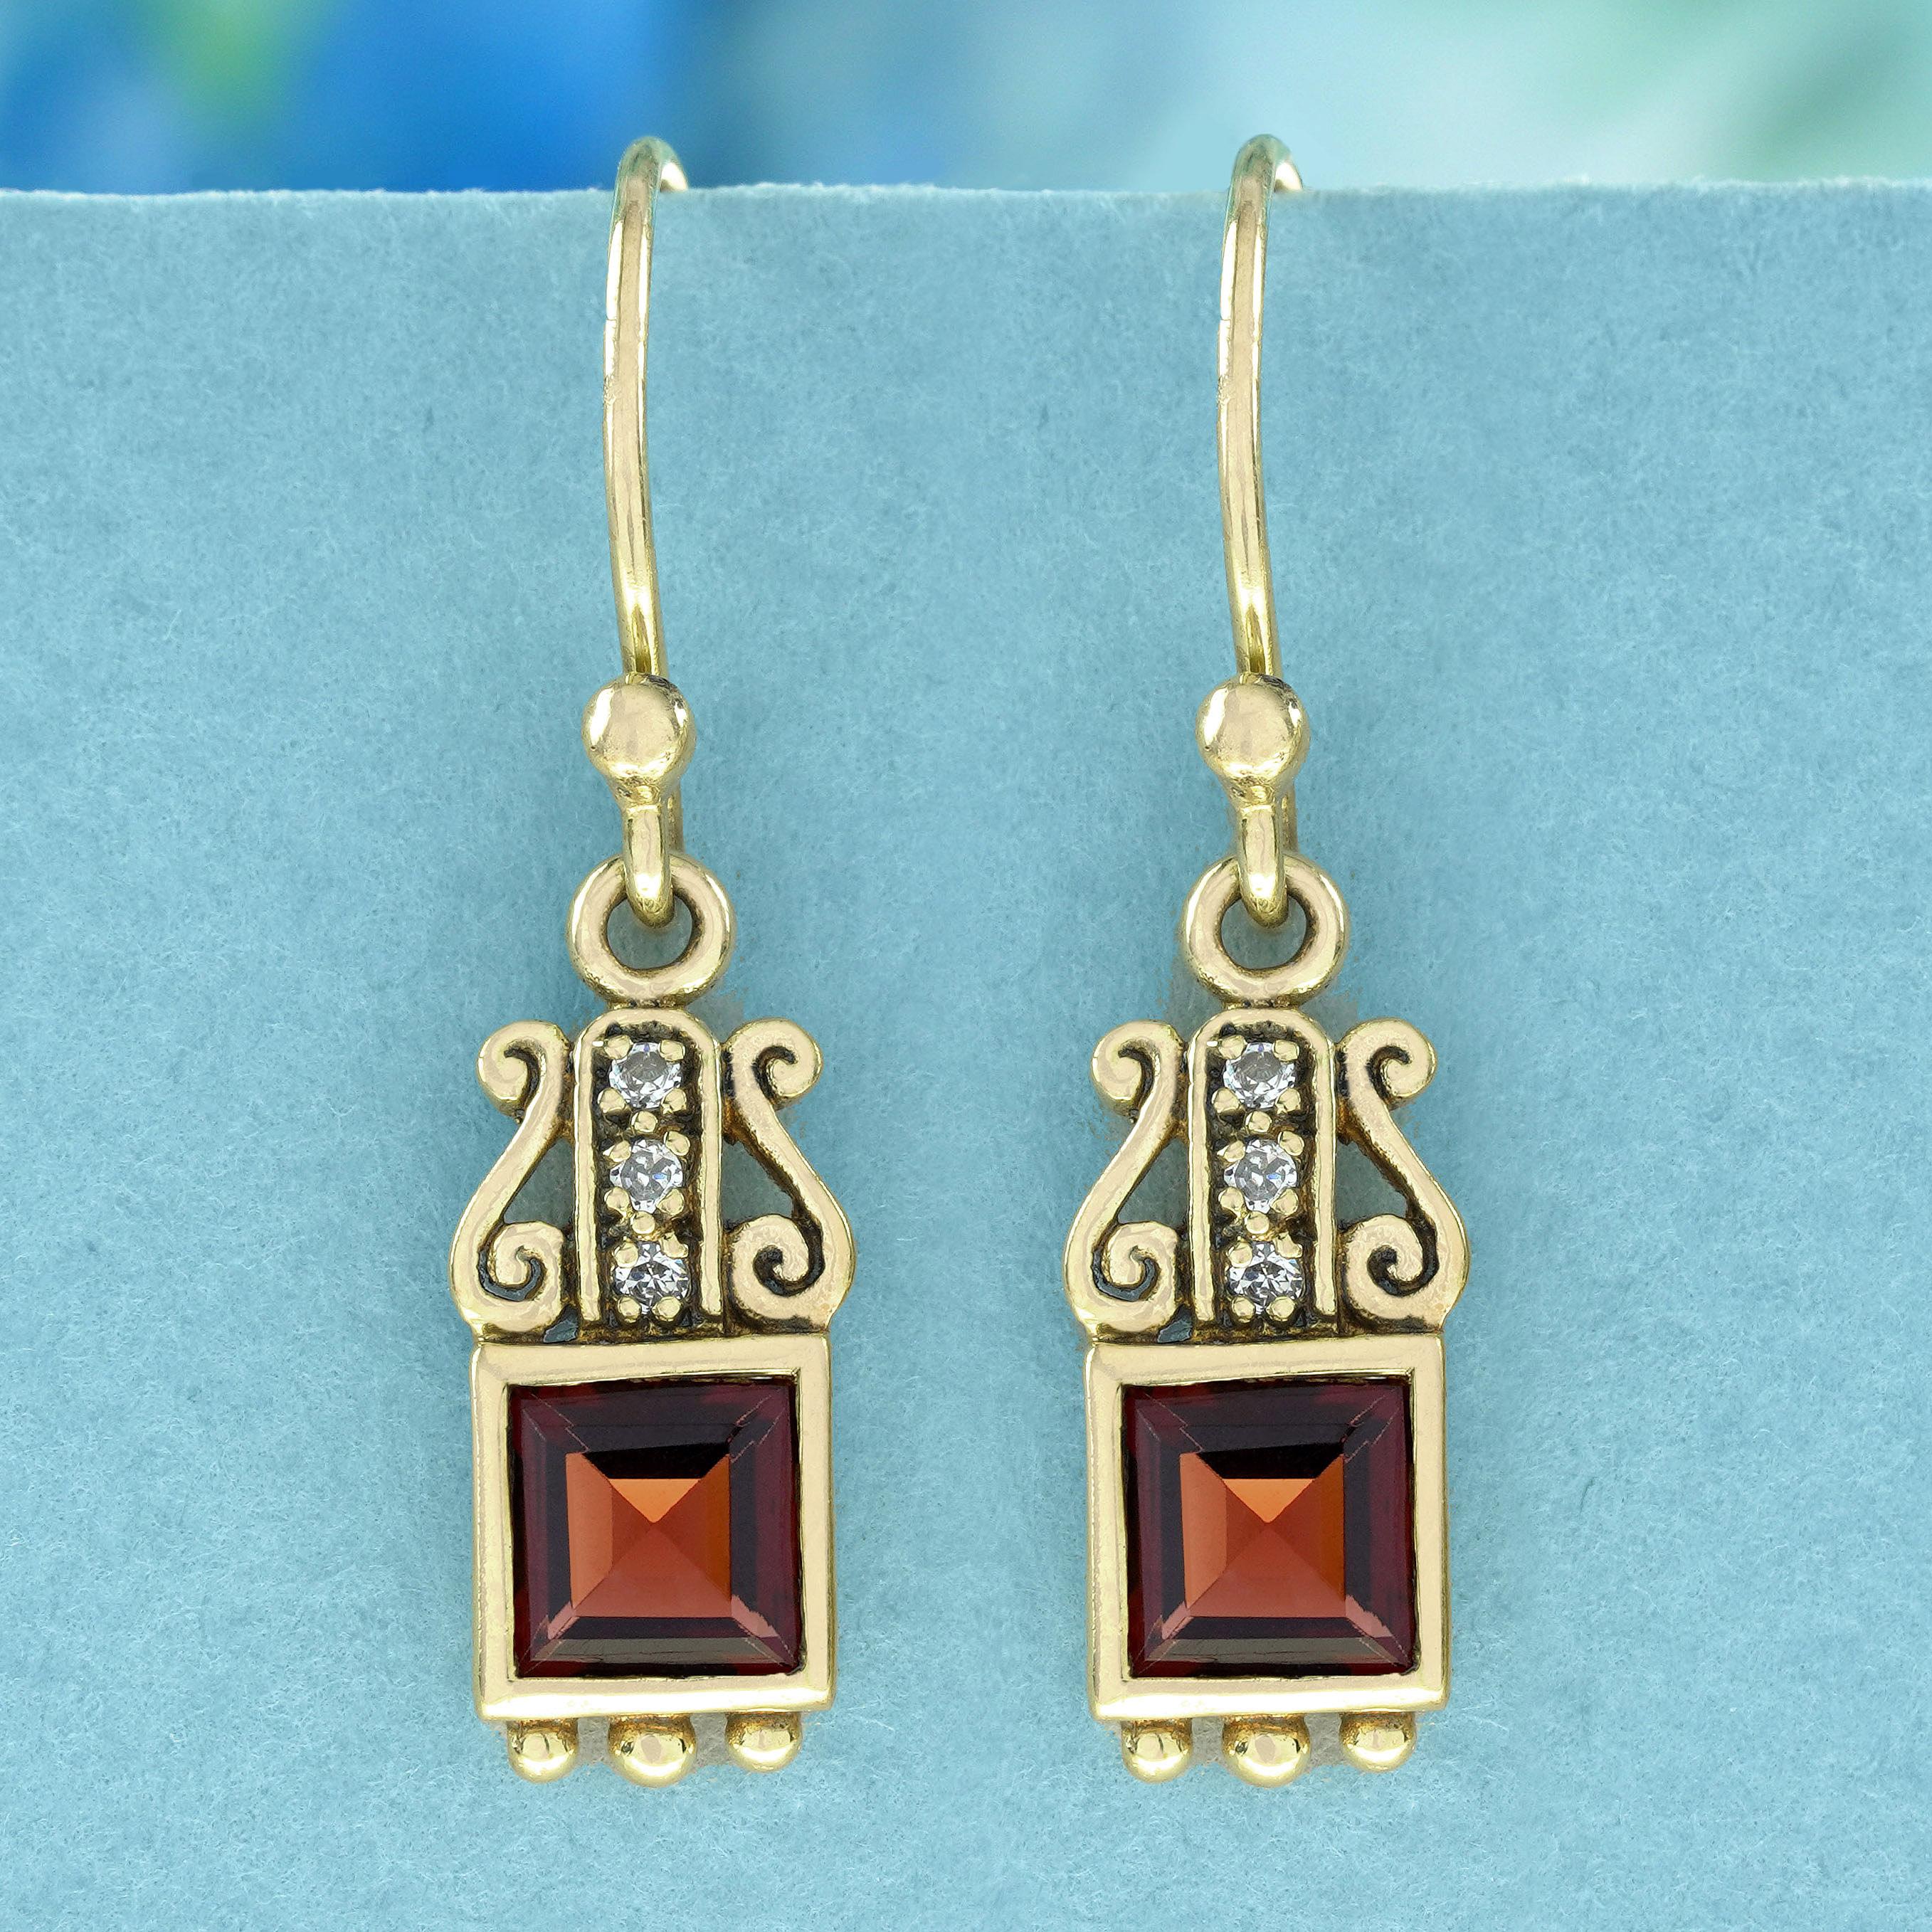 Crafted in vintage-style drop design, these yellow gold earrings feature a deep red square-cut garnet at the bottom. Adorning the top are three cascading round diamonds, offering a touch of sparkle, complemented by delicate scrollwork, culminating